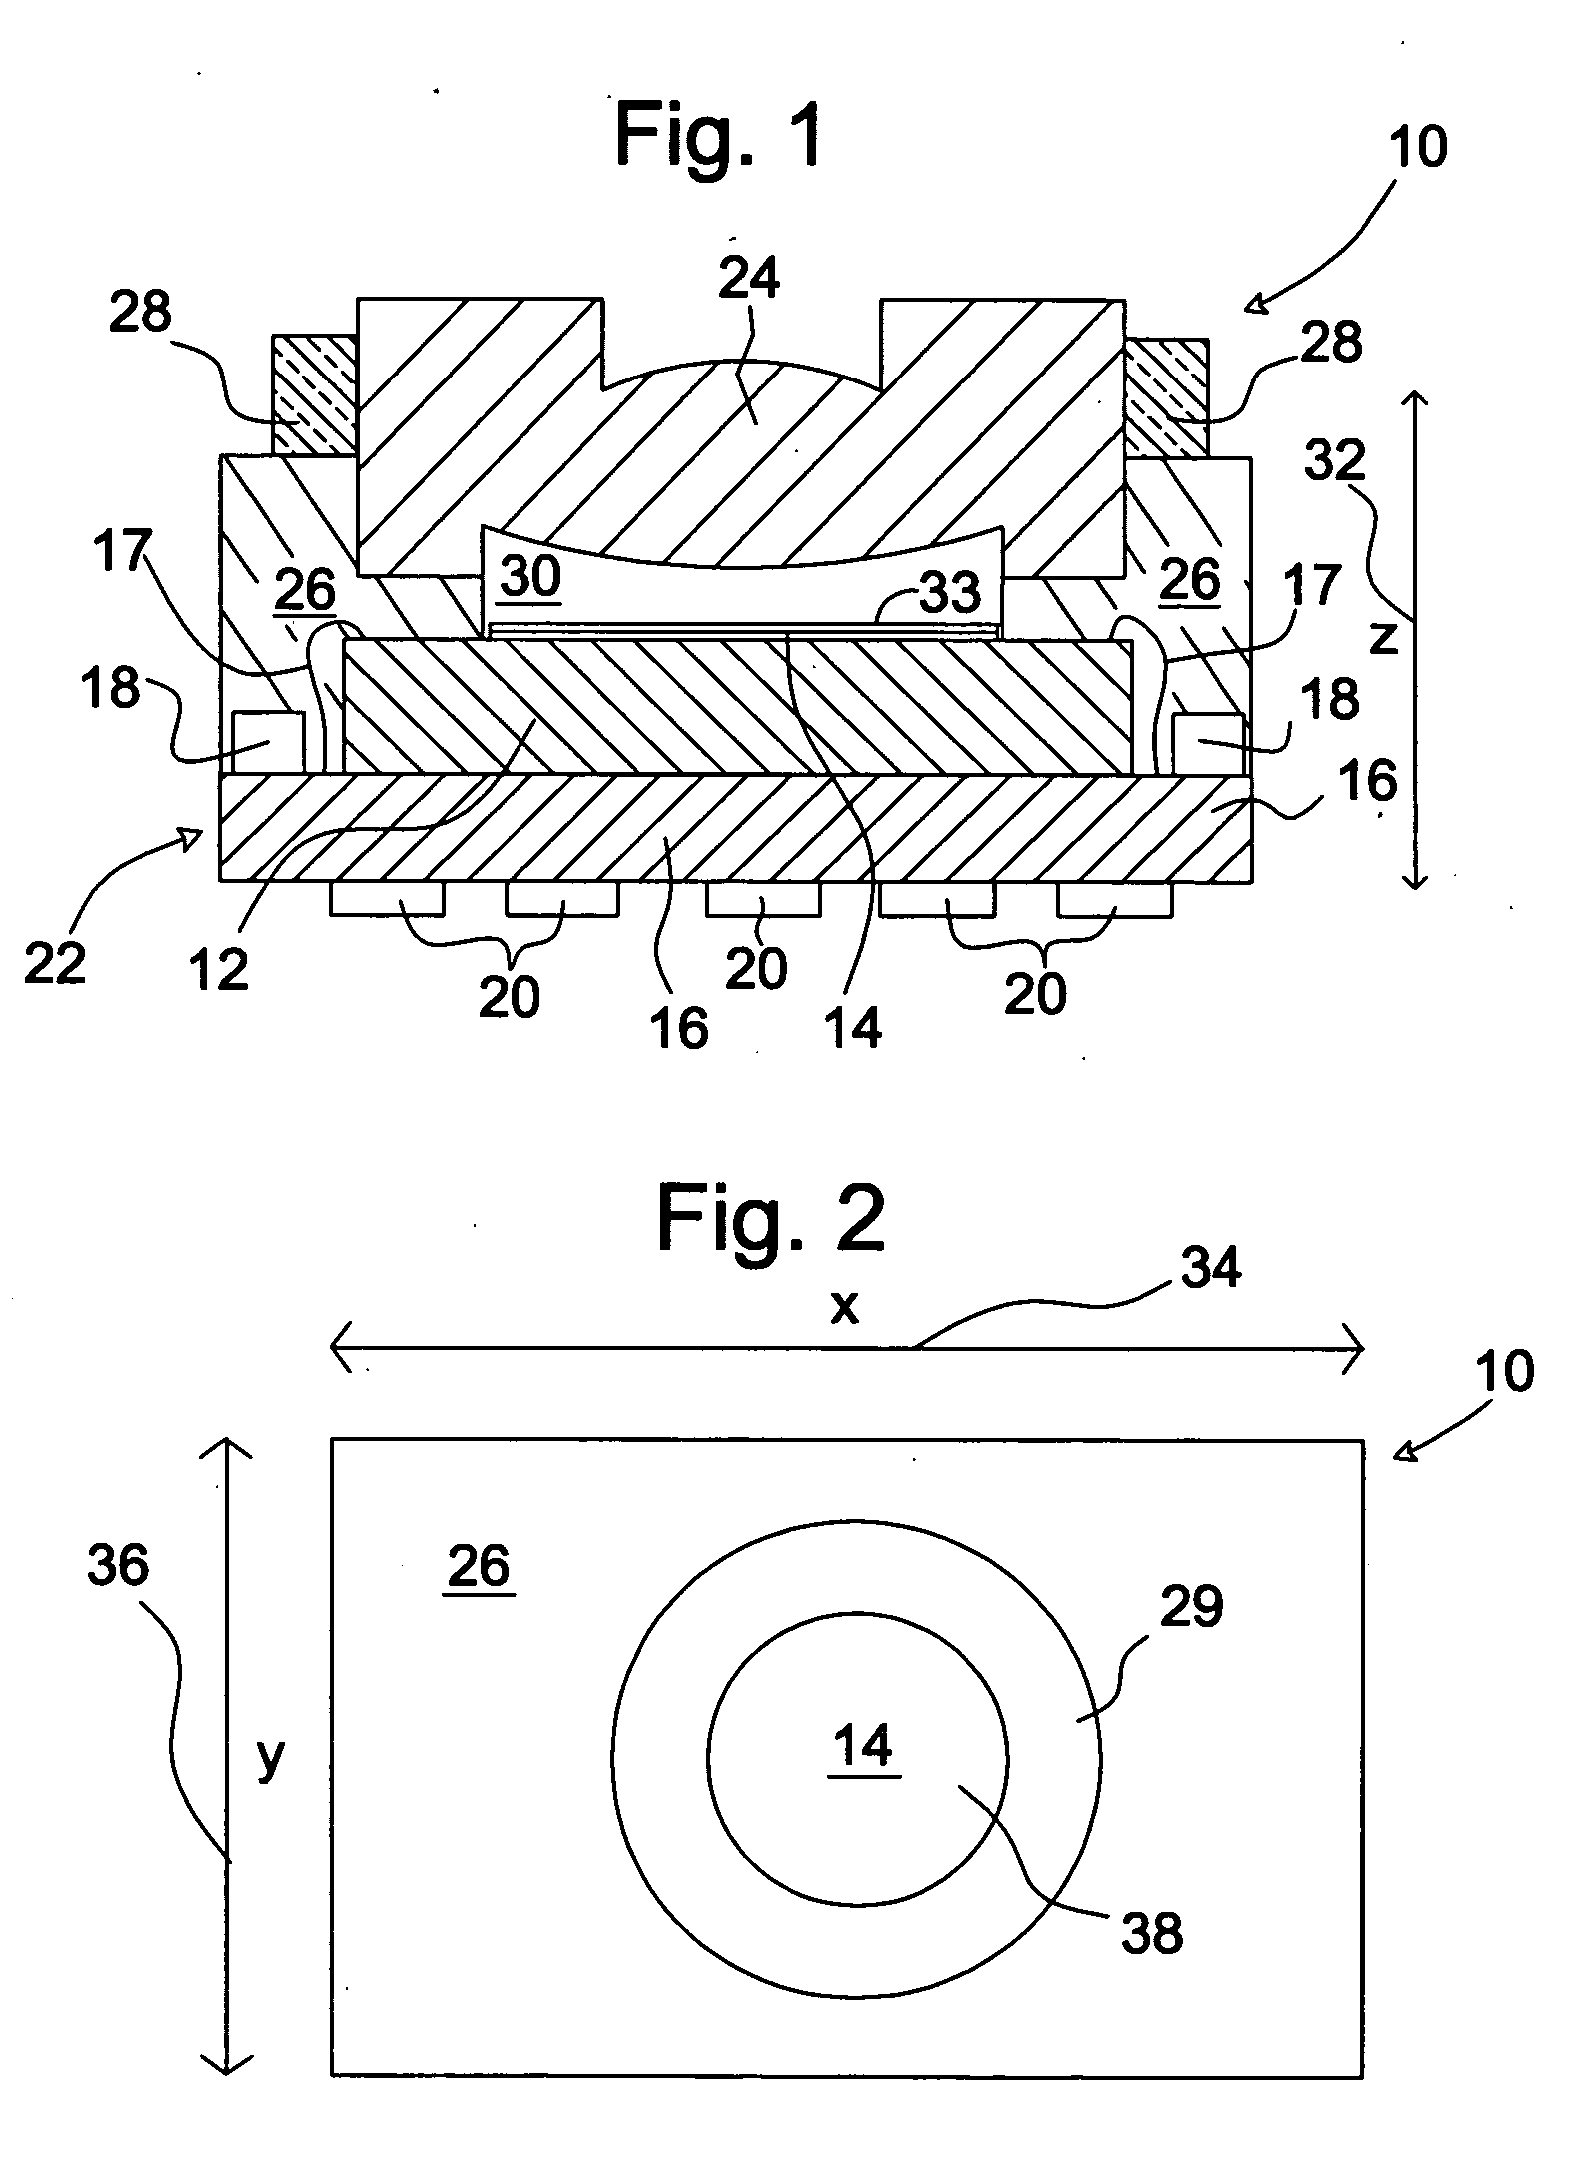 Wafer based camera module and method of manufacture